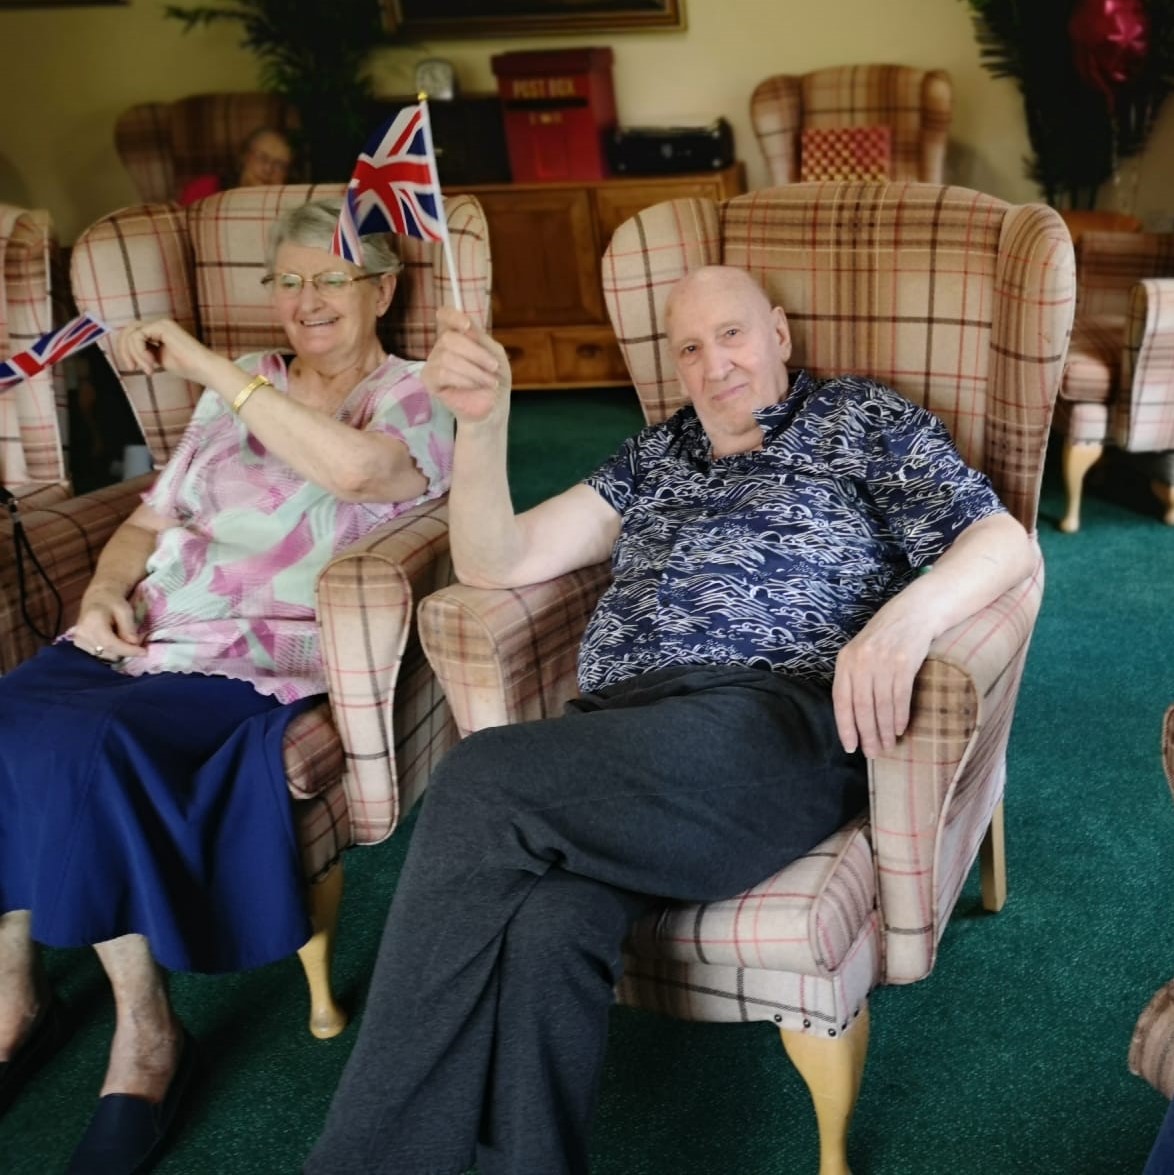 https://www.therightstepdc.co.uk/wp-content/uploads/2022/06/SQ-Victory-House-care-home-Luton-Chatham-Medway-Active-Armchairs-Seated-Dance.jpg